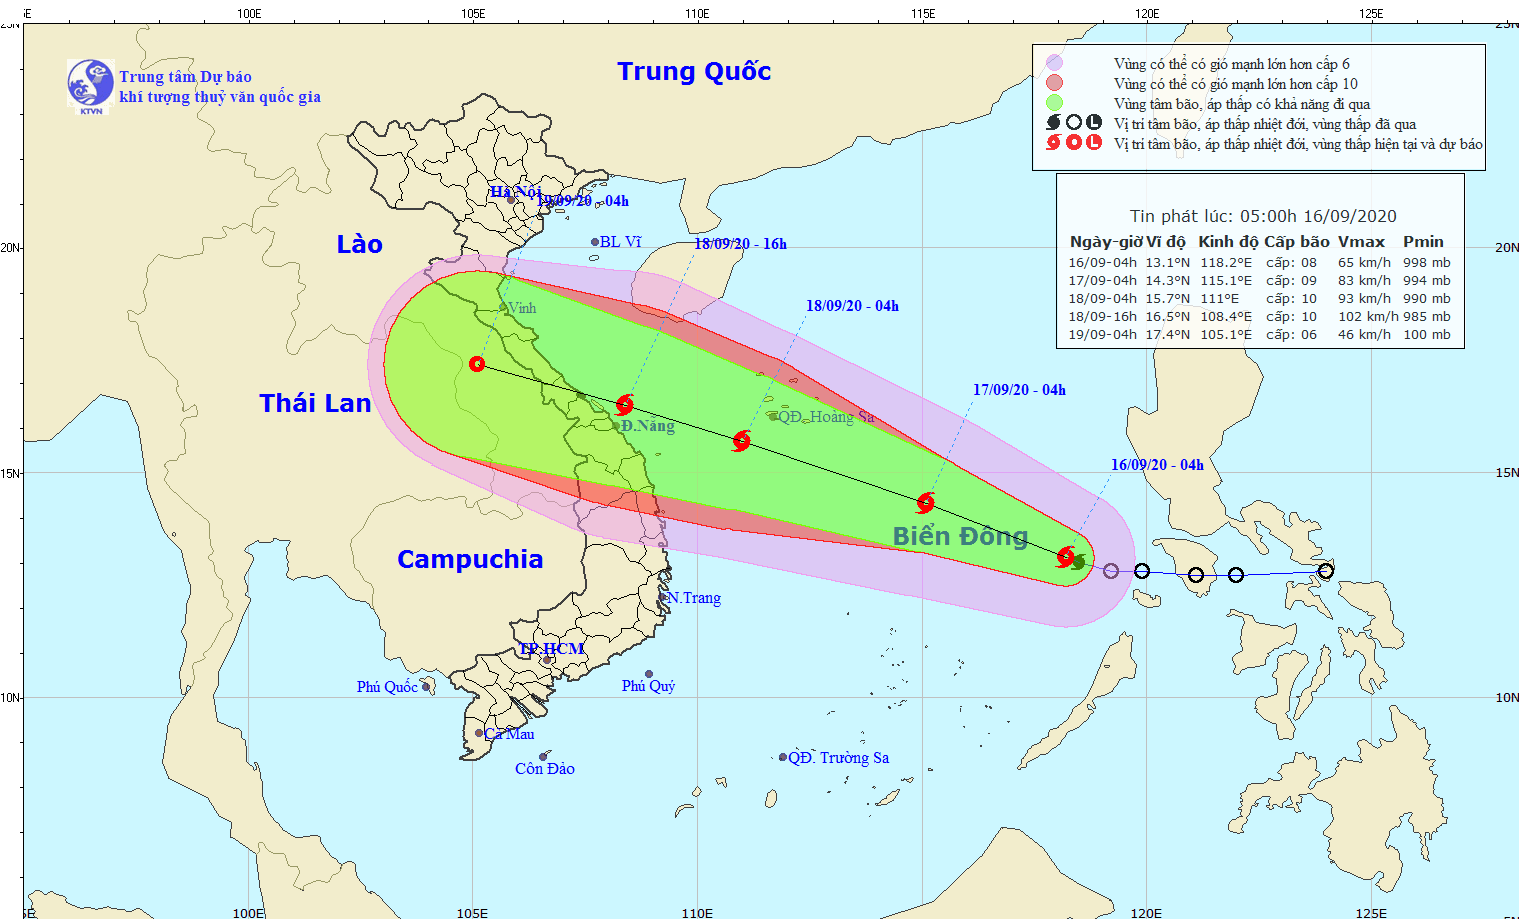 Path map of typhoon Noul this morning